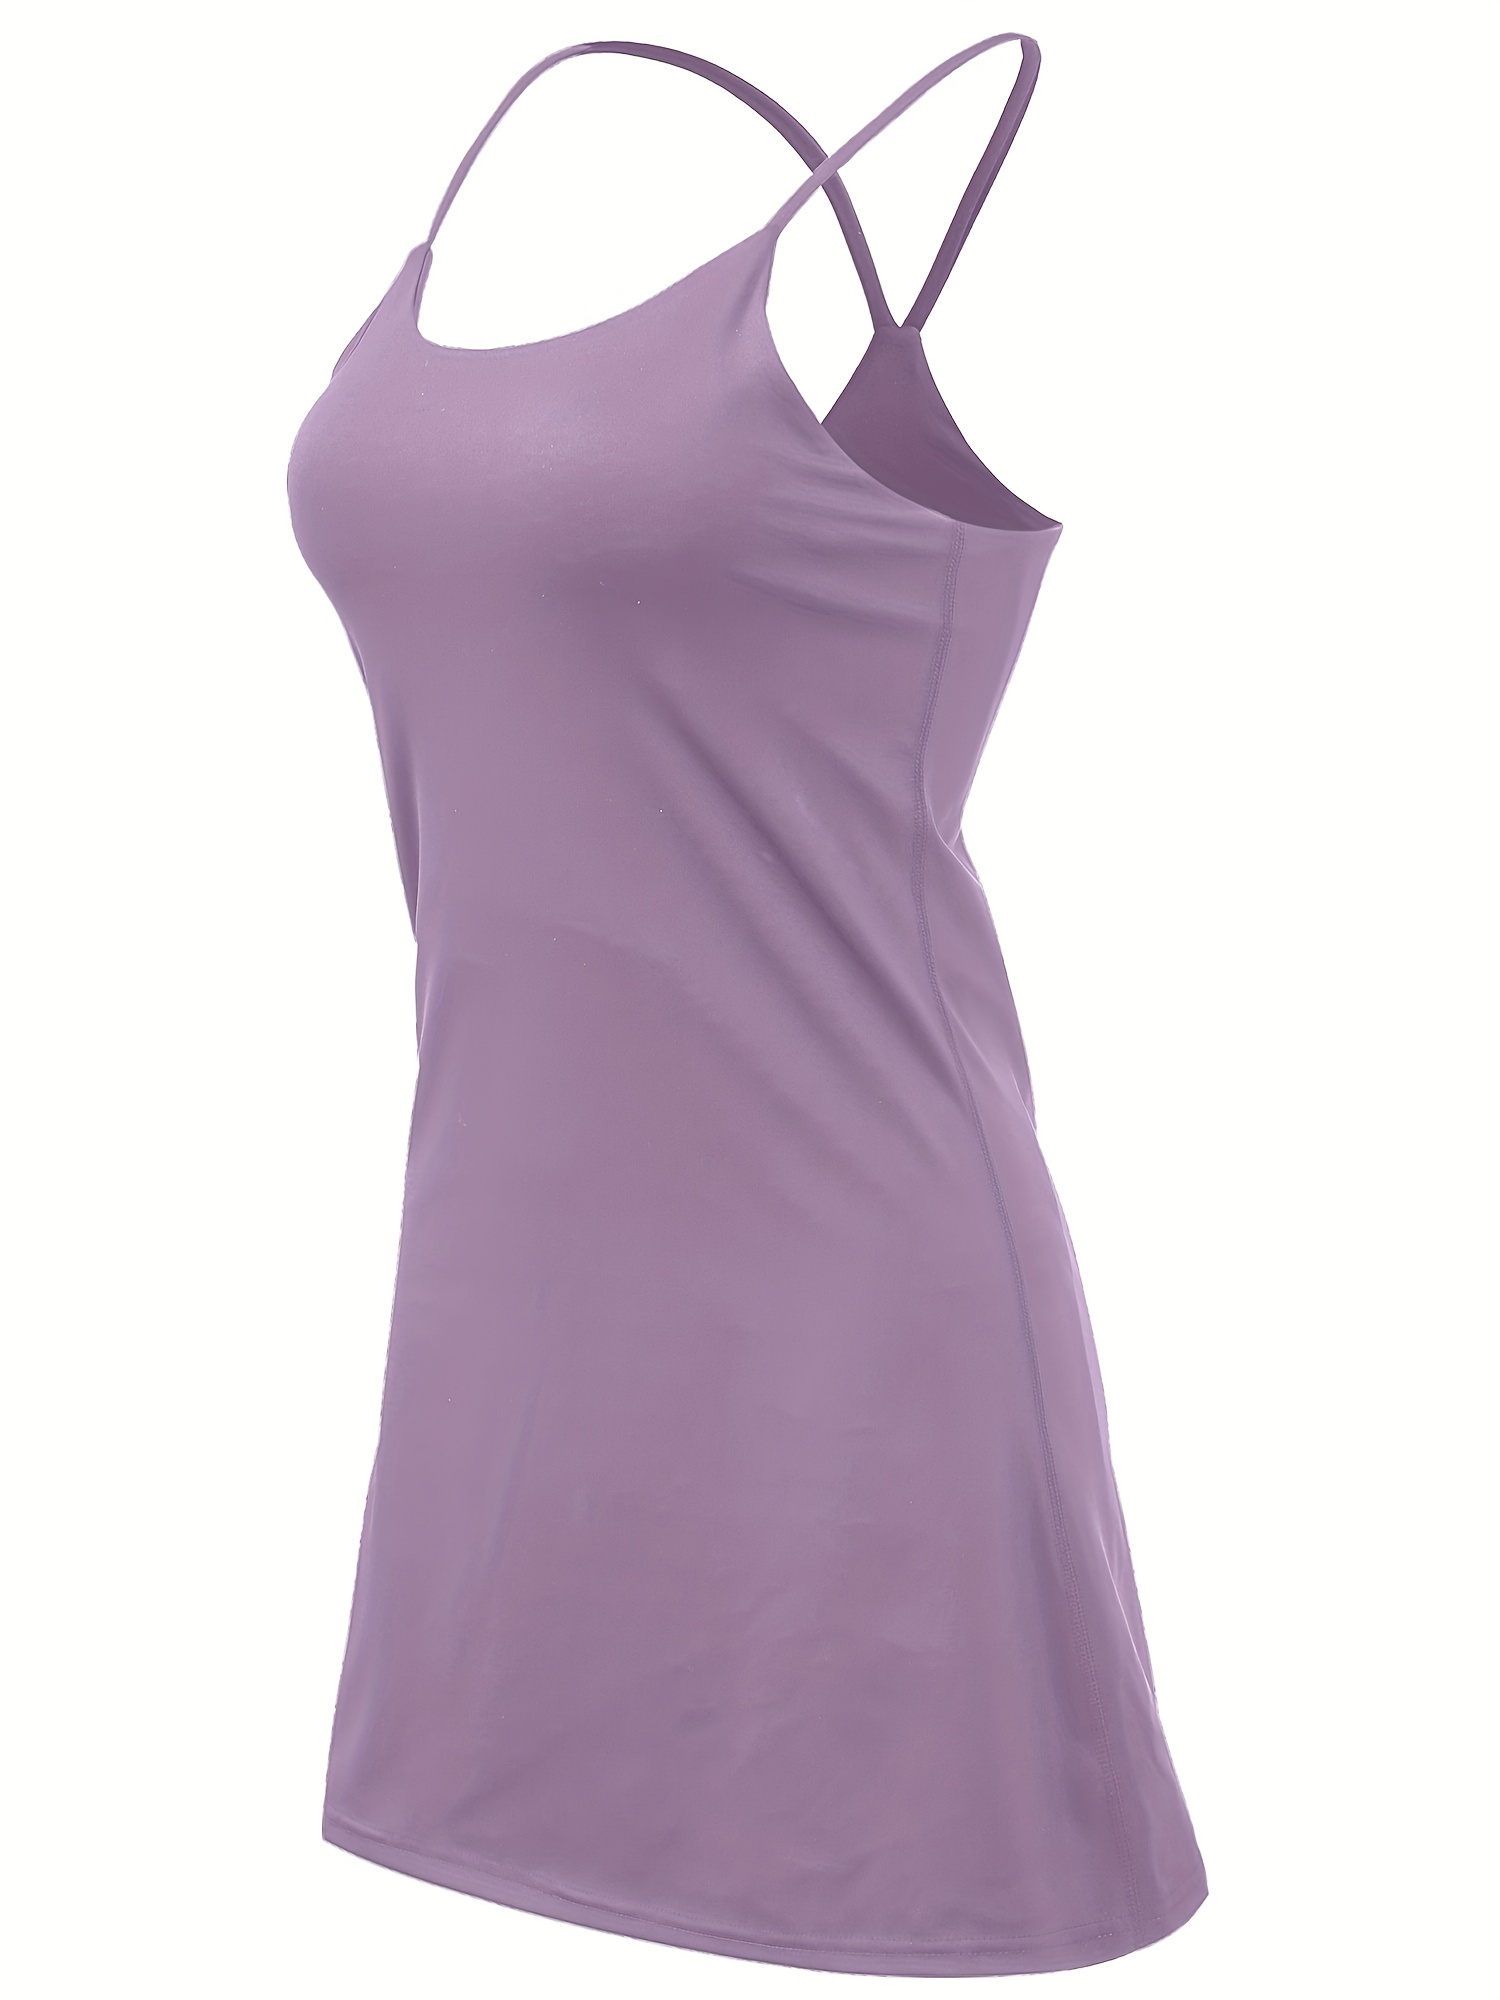 KYODAN | NWT Lavender Athletic Dress Built in Shorts and Padded Bra Size L